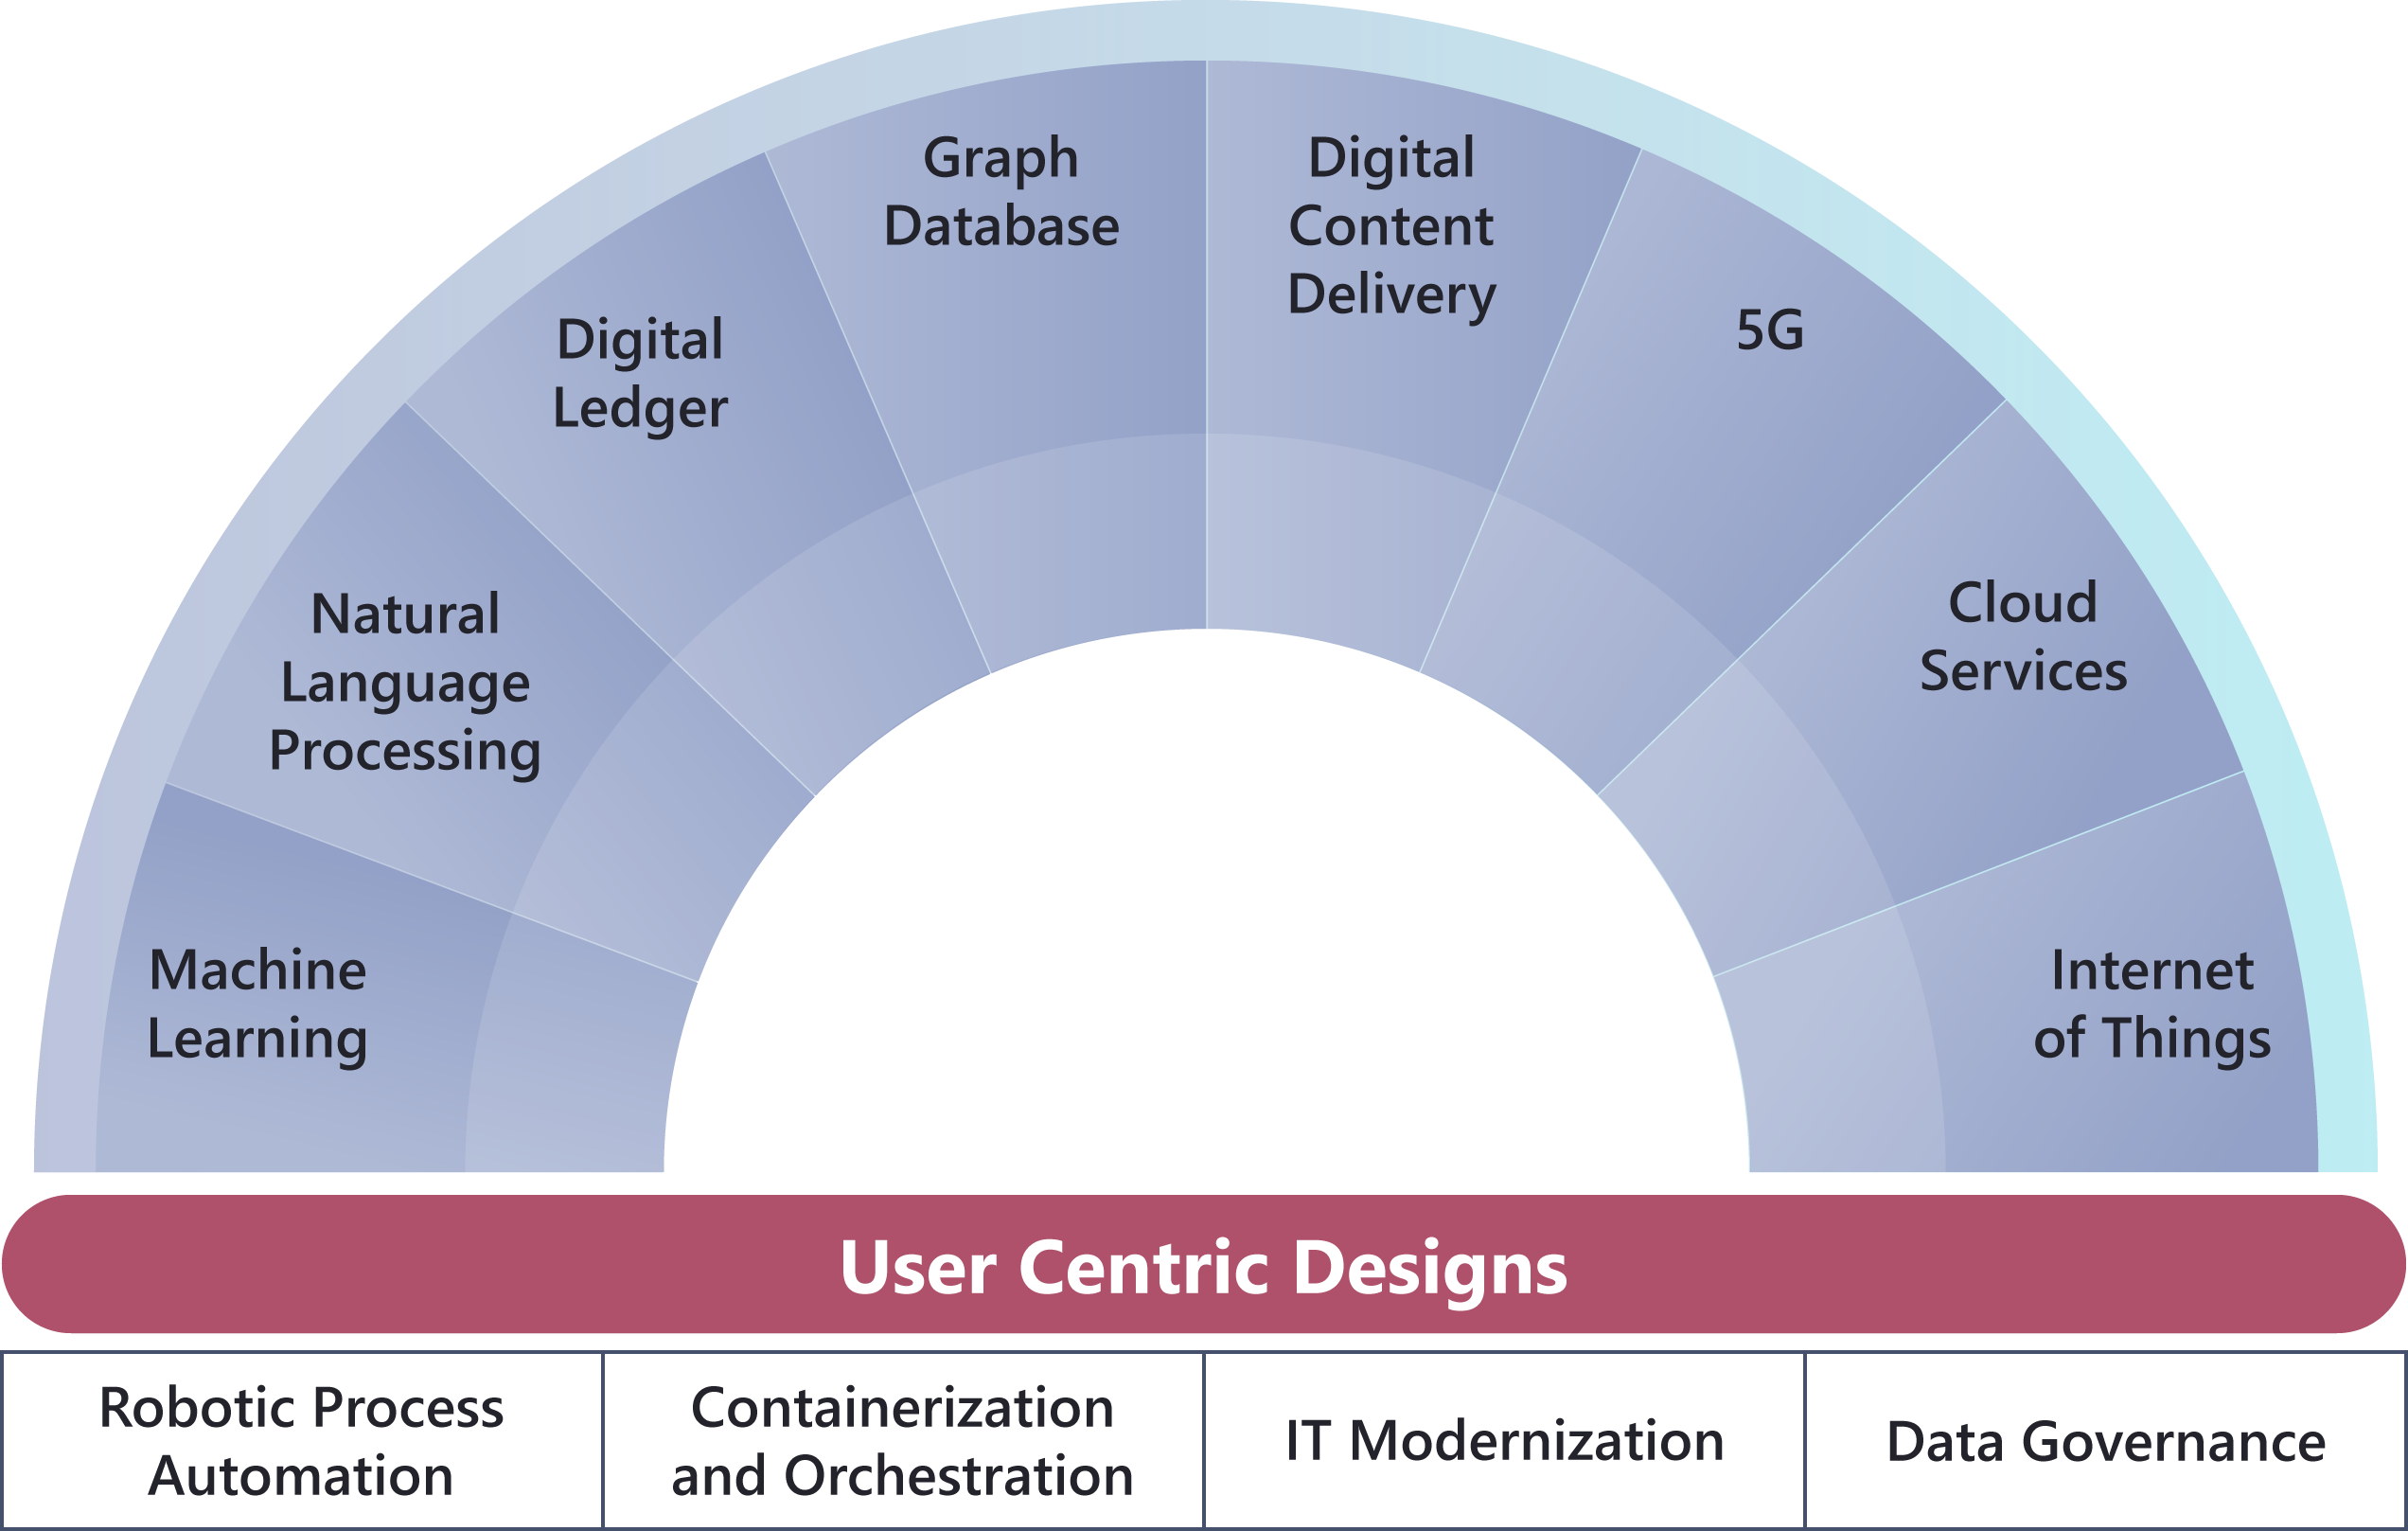 A diagram illustrating the types of work the Innovation Lab is involved with, including: machine learning, natural language processing, digital ledger, graph database, digital content delivery, 5G, cloud services, and the internet of things. The Lab performs its work using a user centric design approach and relies on its core areas of focus, which include: robotic process automation, containerization and orchestration, IT modernization, data governance.